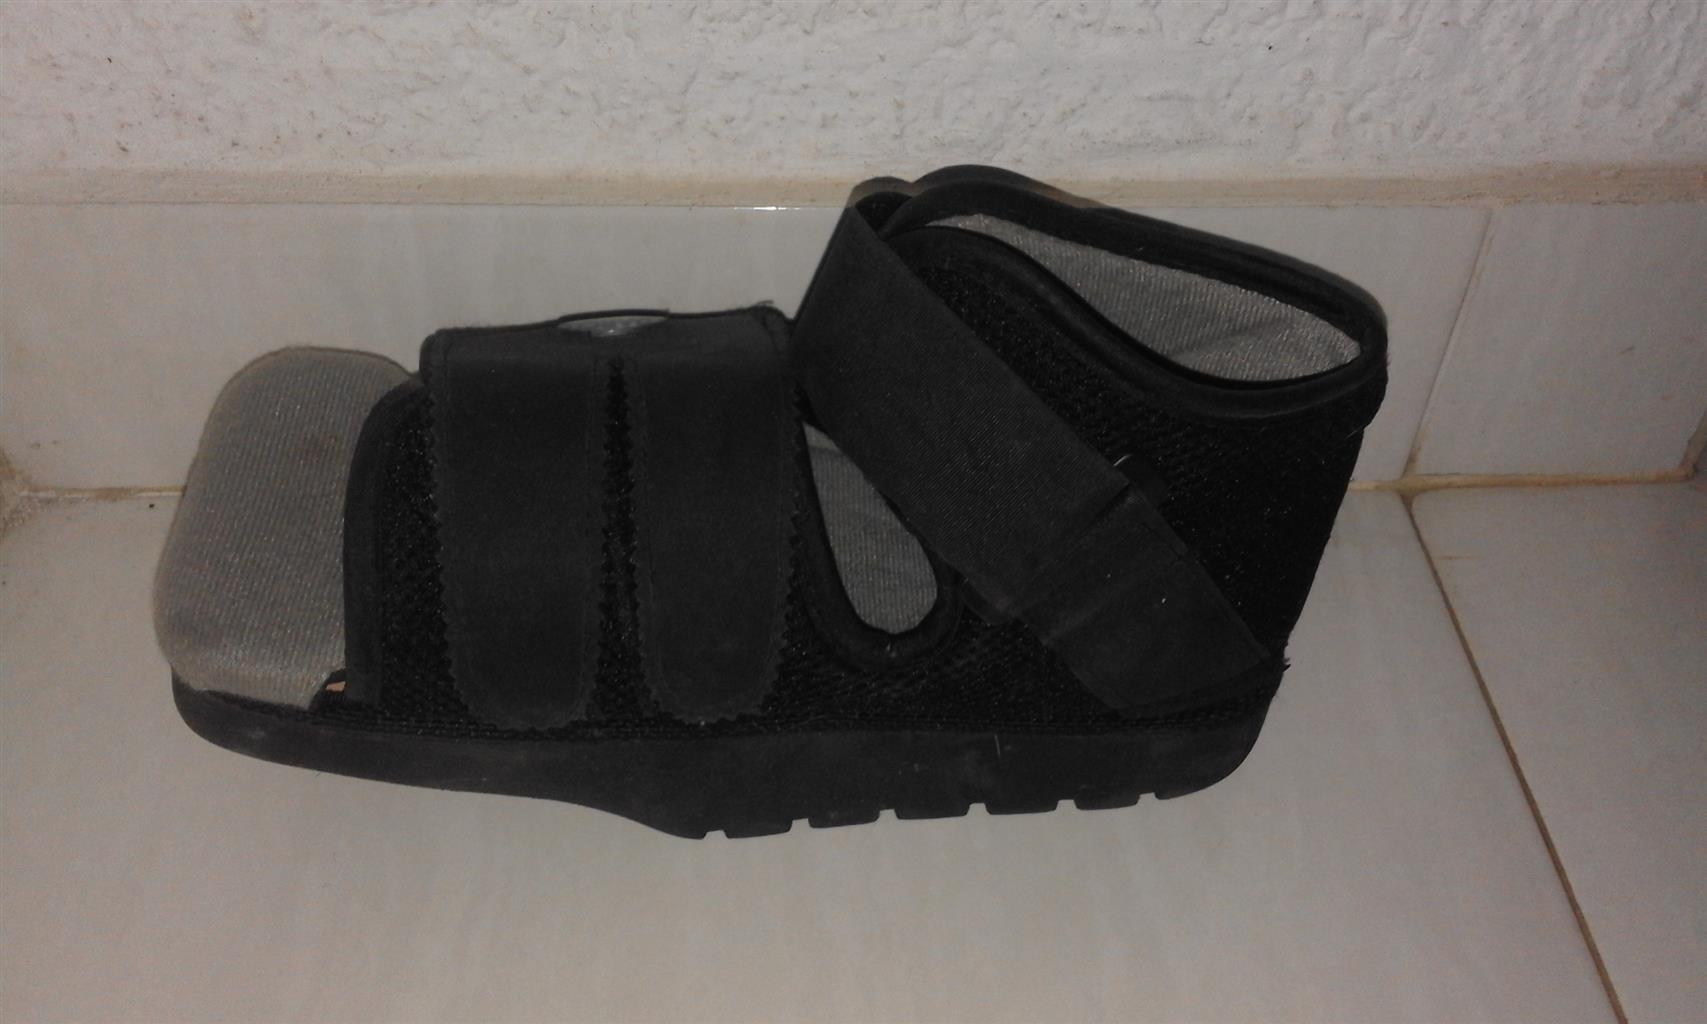 Darco Orthopaedic Shoes for immobilizing the foot after Trauma or Operation . R500.  Darco Orthopaedic Shoes for immobilizing the foot after Trauma or Operation . R500.